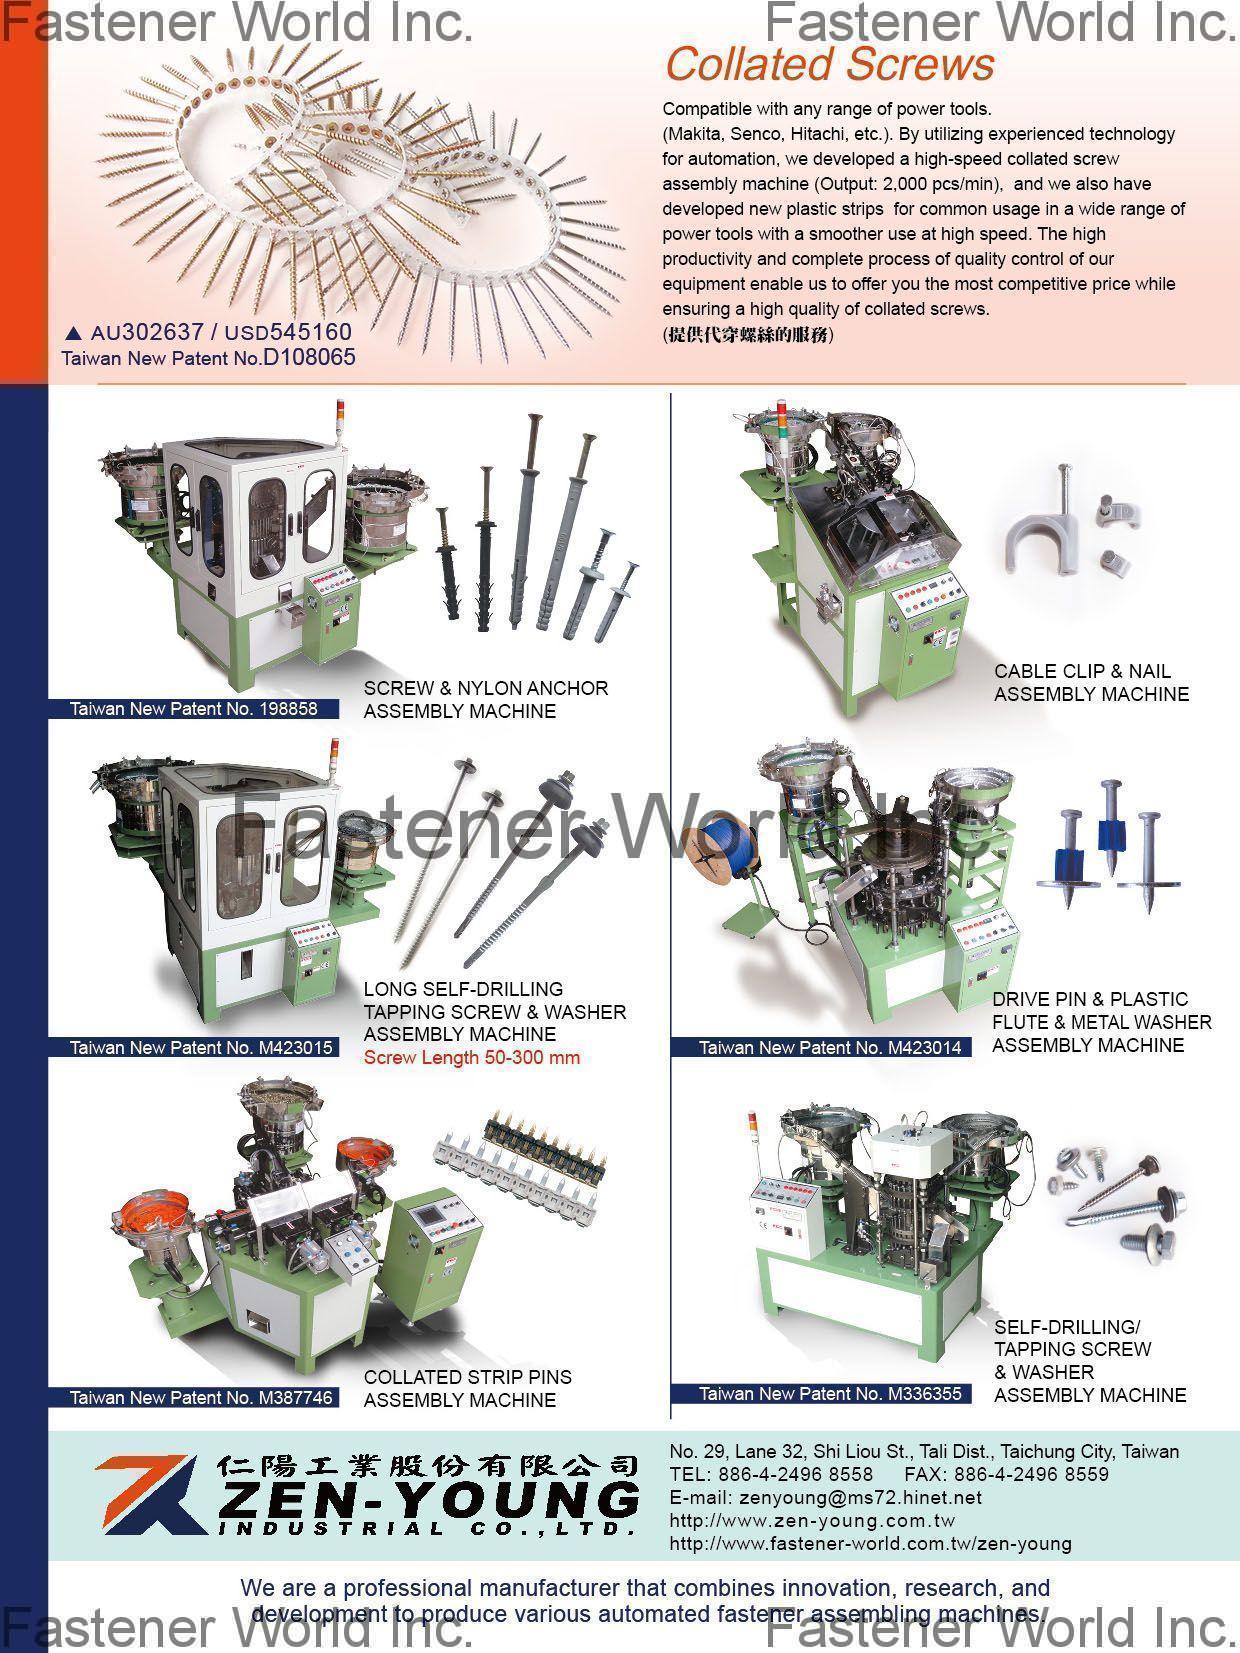 ZEN-YOUNG INDUSTRIAL CO., LTD.  , Collated Screws,Screw & Nylon Anchor Assembly Machine,Long Self-Drilling & Washer Assembly Machine,Cable Clip & Nail Assembly Machine,Drive Pin , Fastener Maker